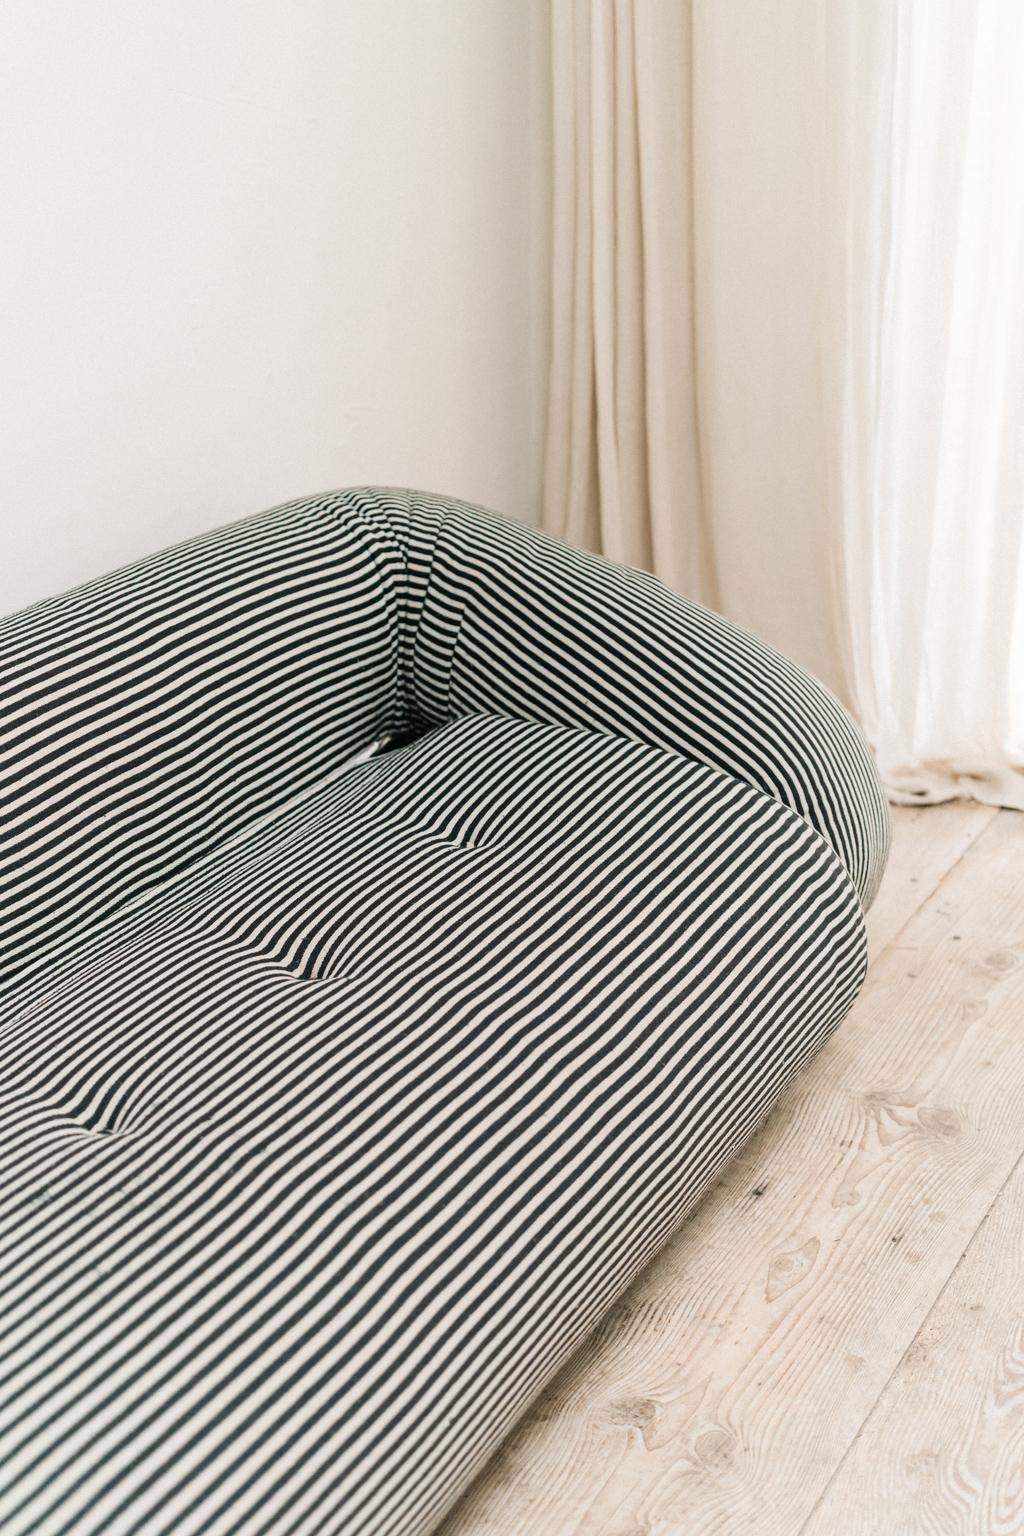 Anfibio Transformable sofa bed by Alessandro Becchi for Giovannetti 8